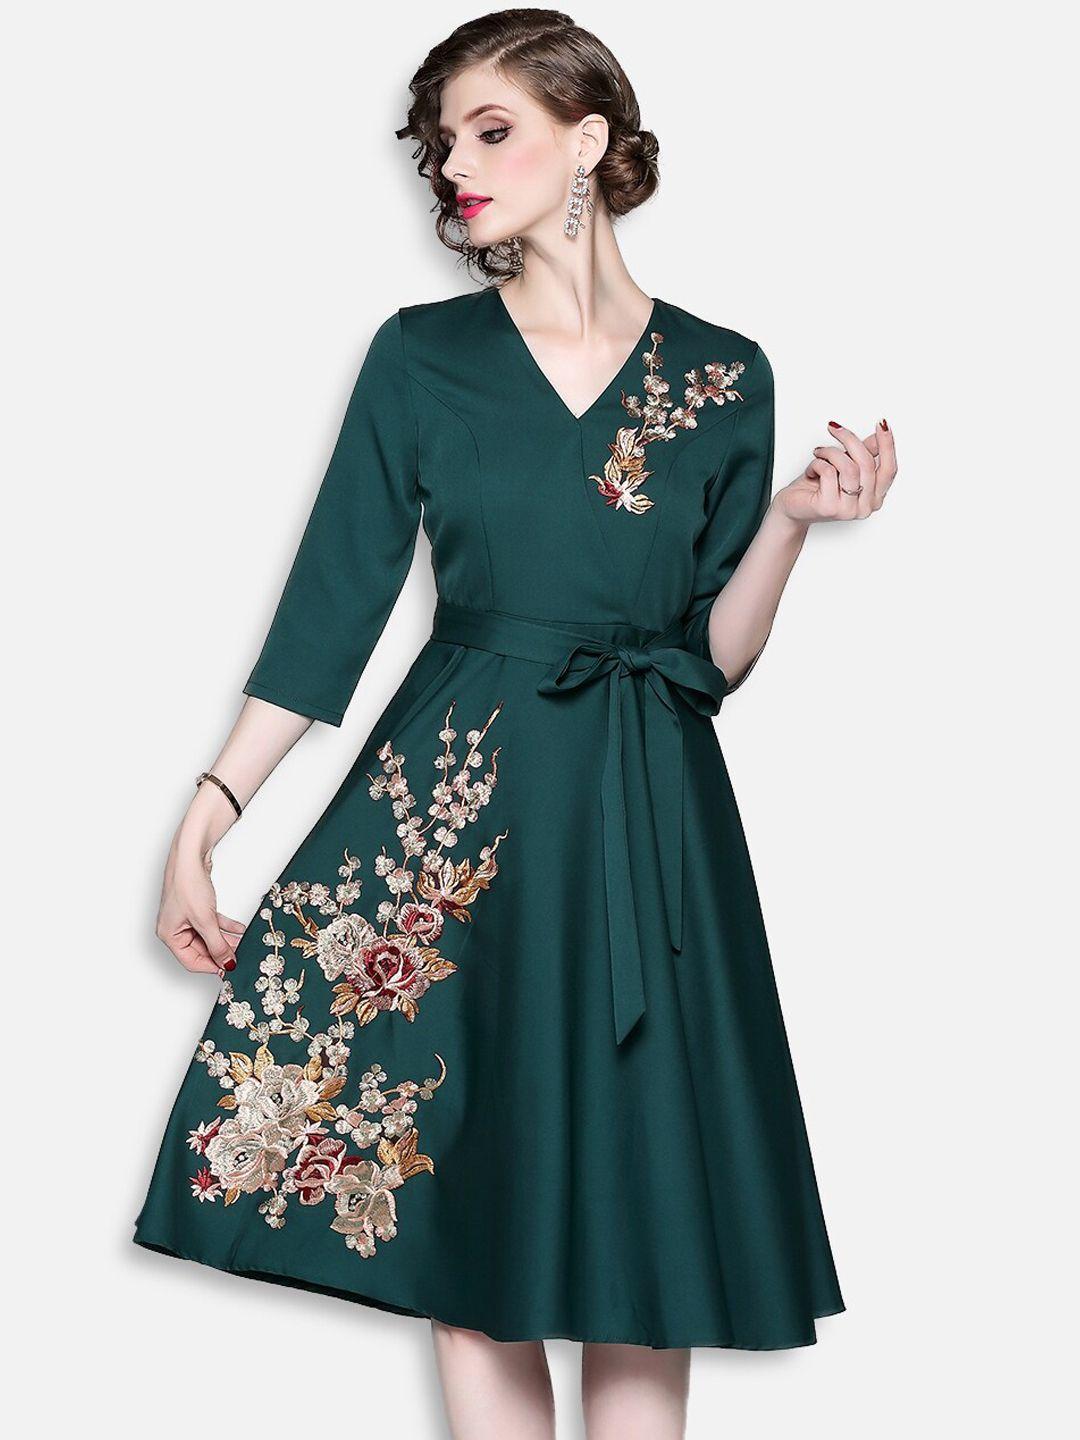 jc collection green floral dress